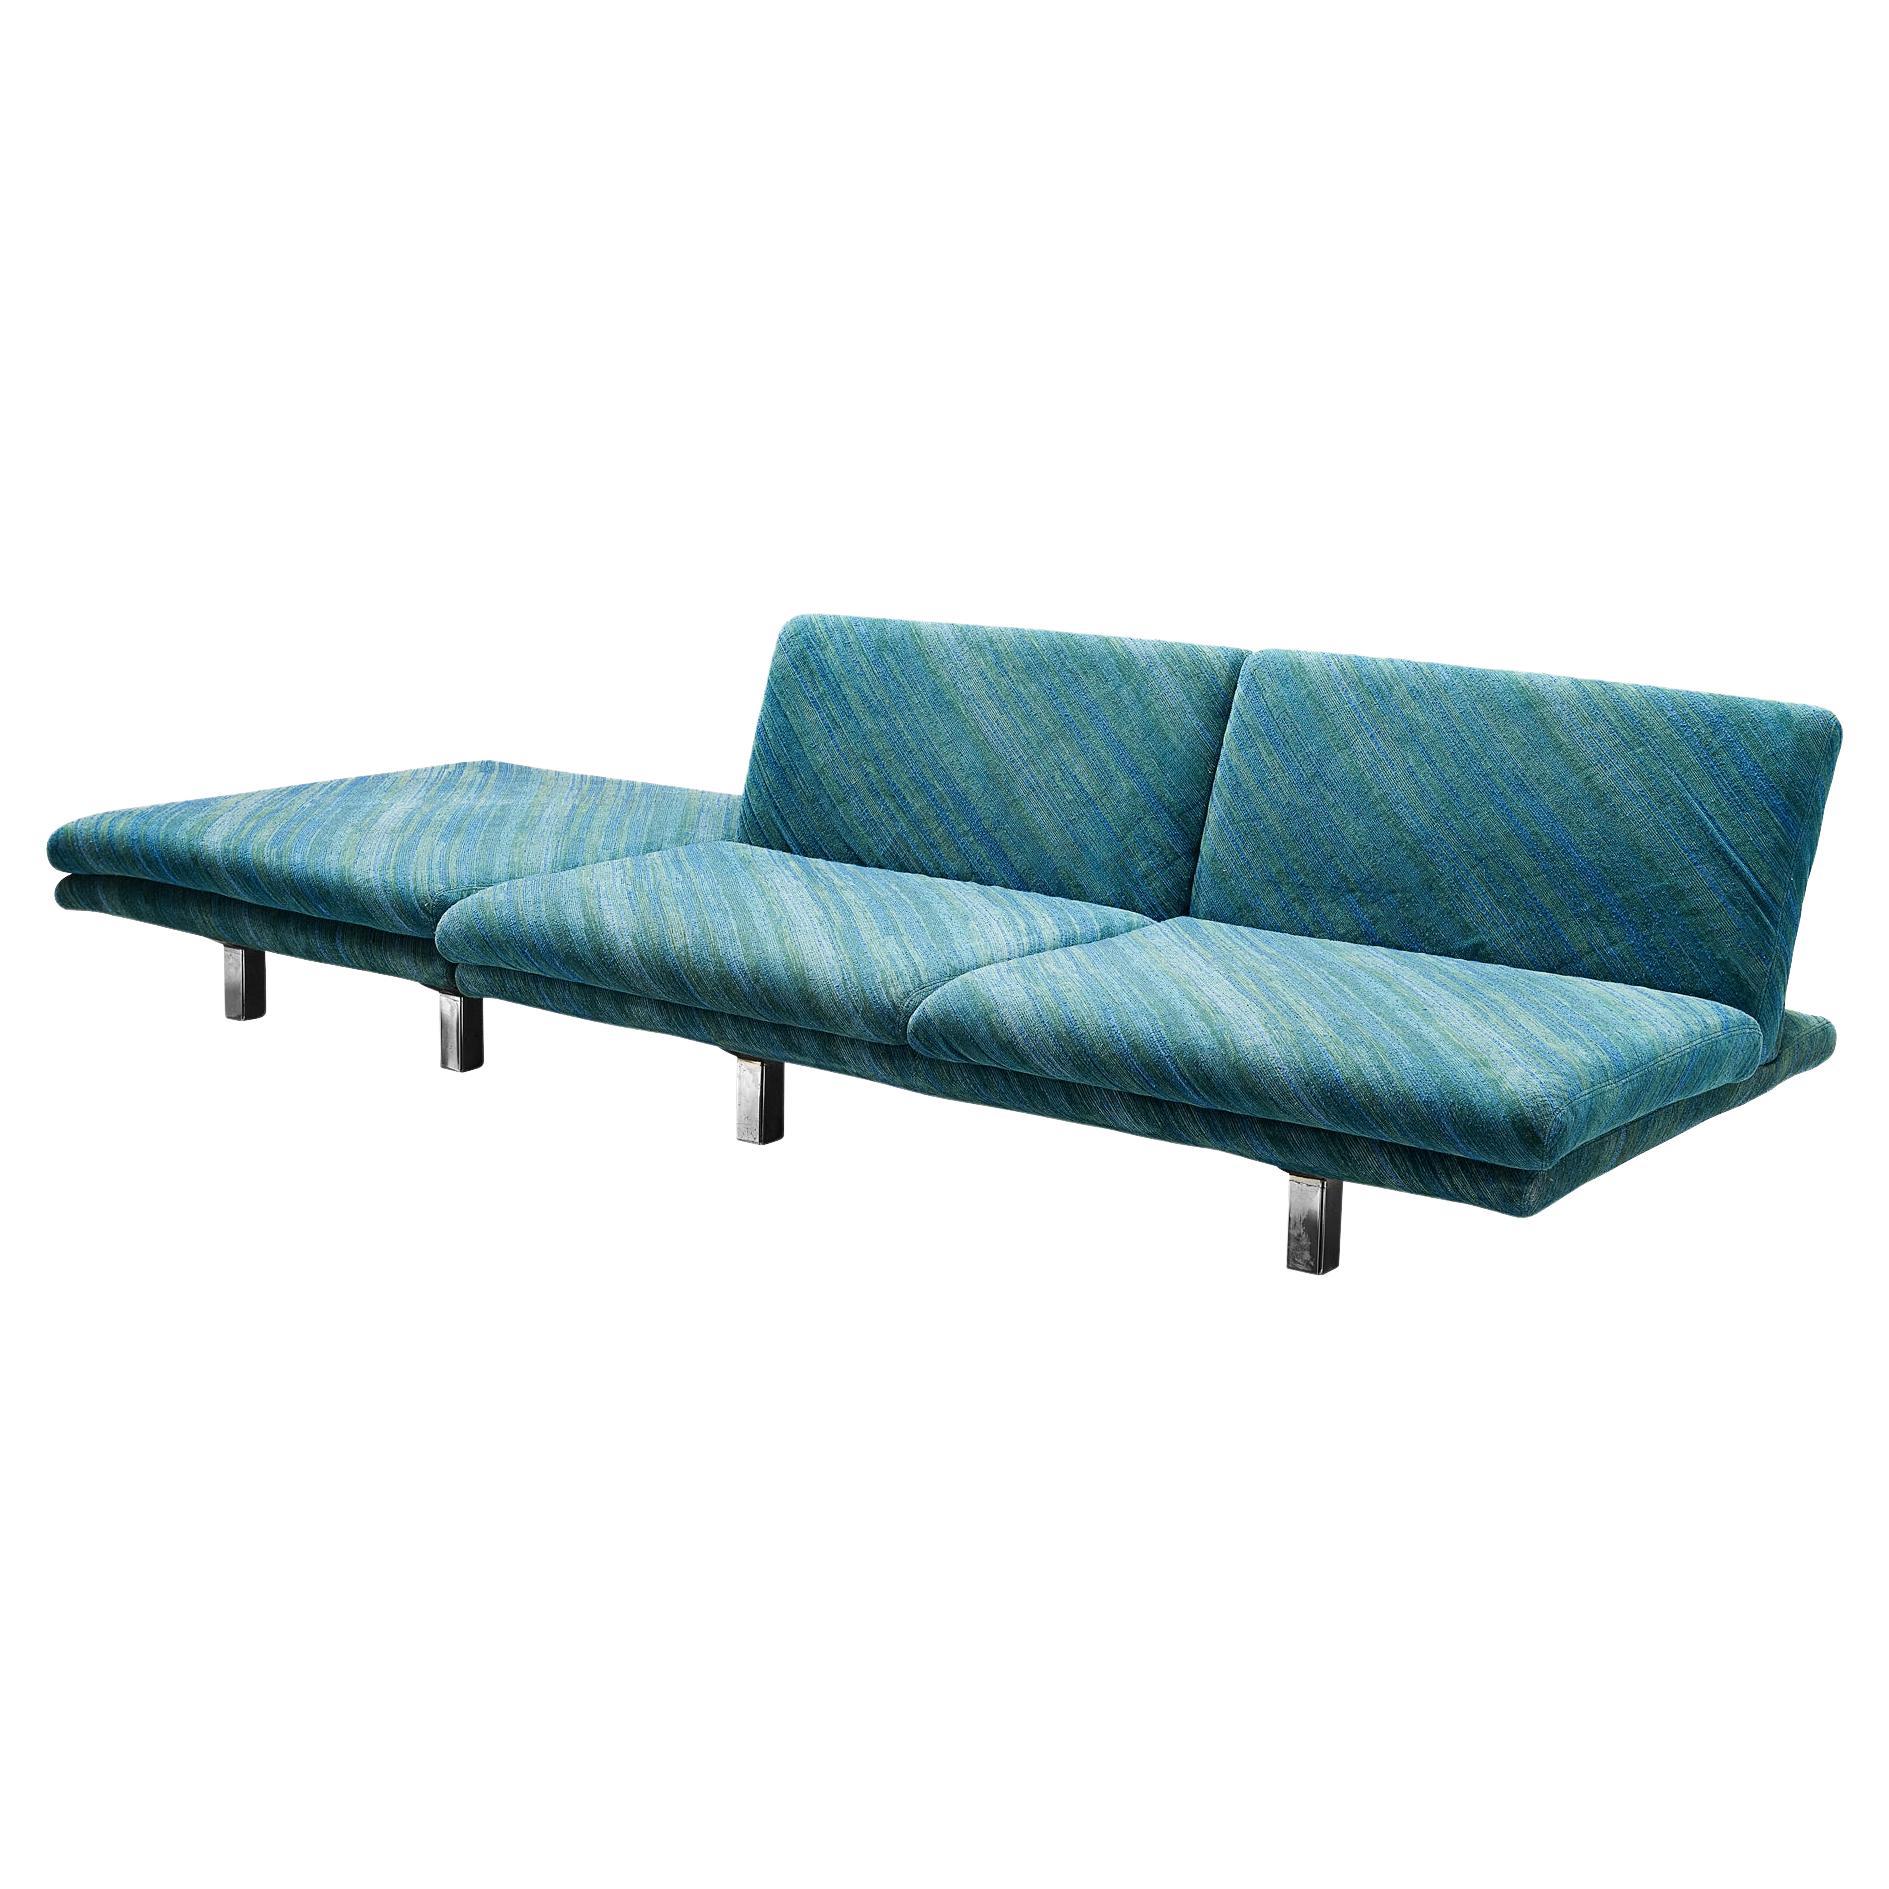 Saporiti Two Seat Sofa with Ottoman in Green-Blue Upholstery 